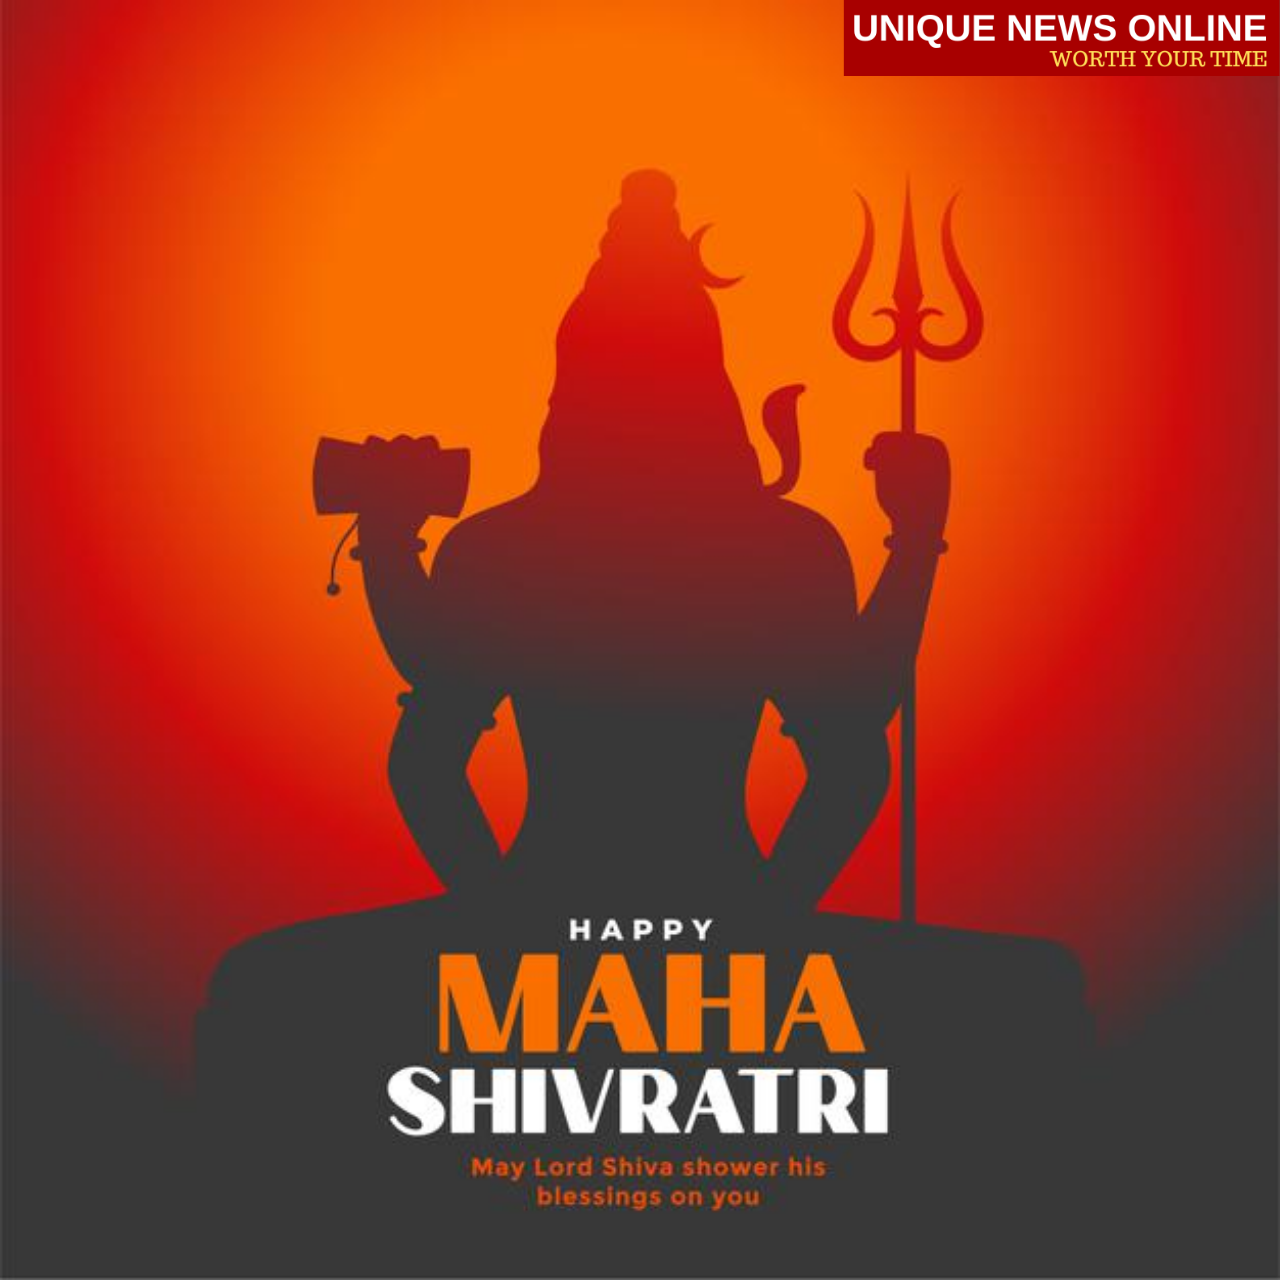 Maha Shivratri 2021 Wishes, Messages, Greetings, Quotes, and Images